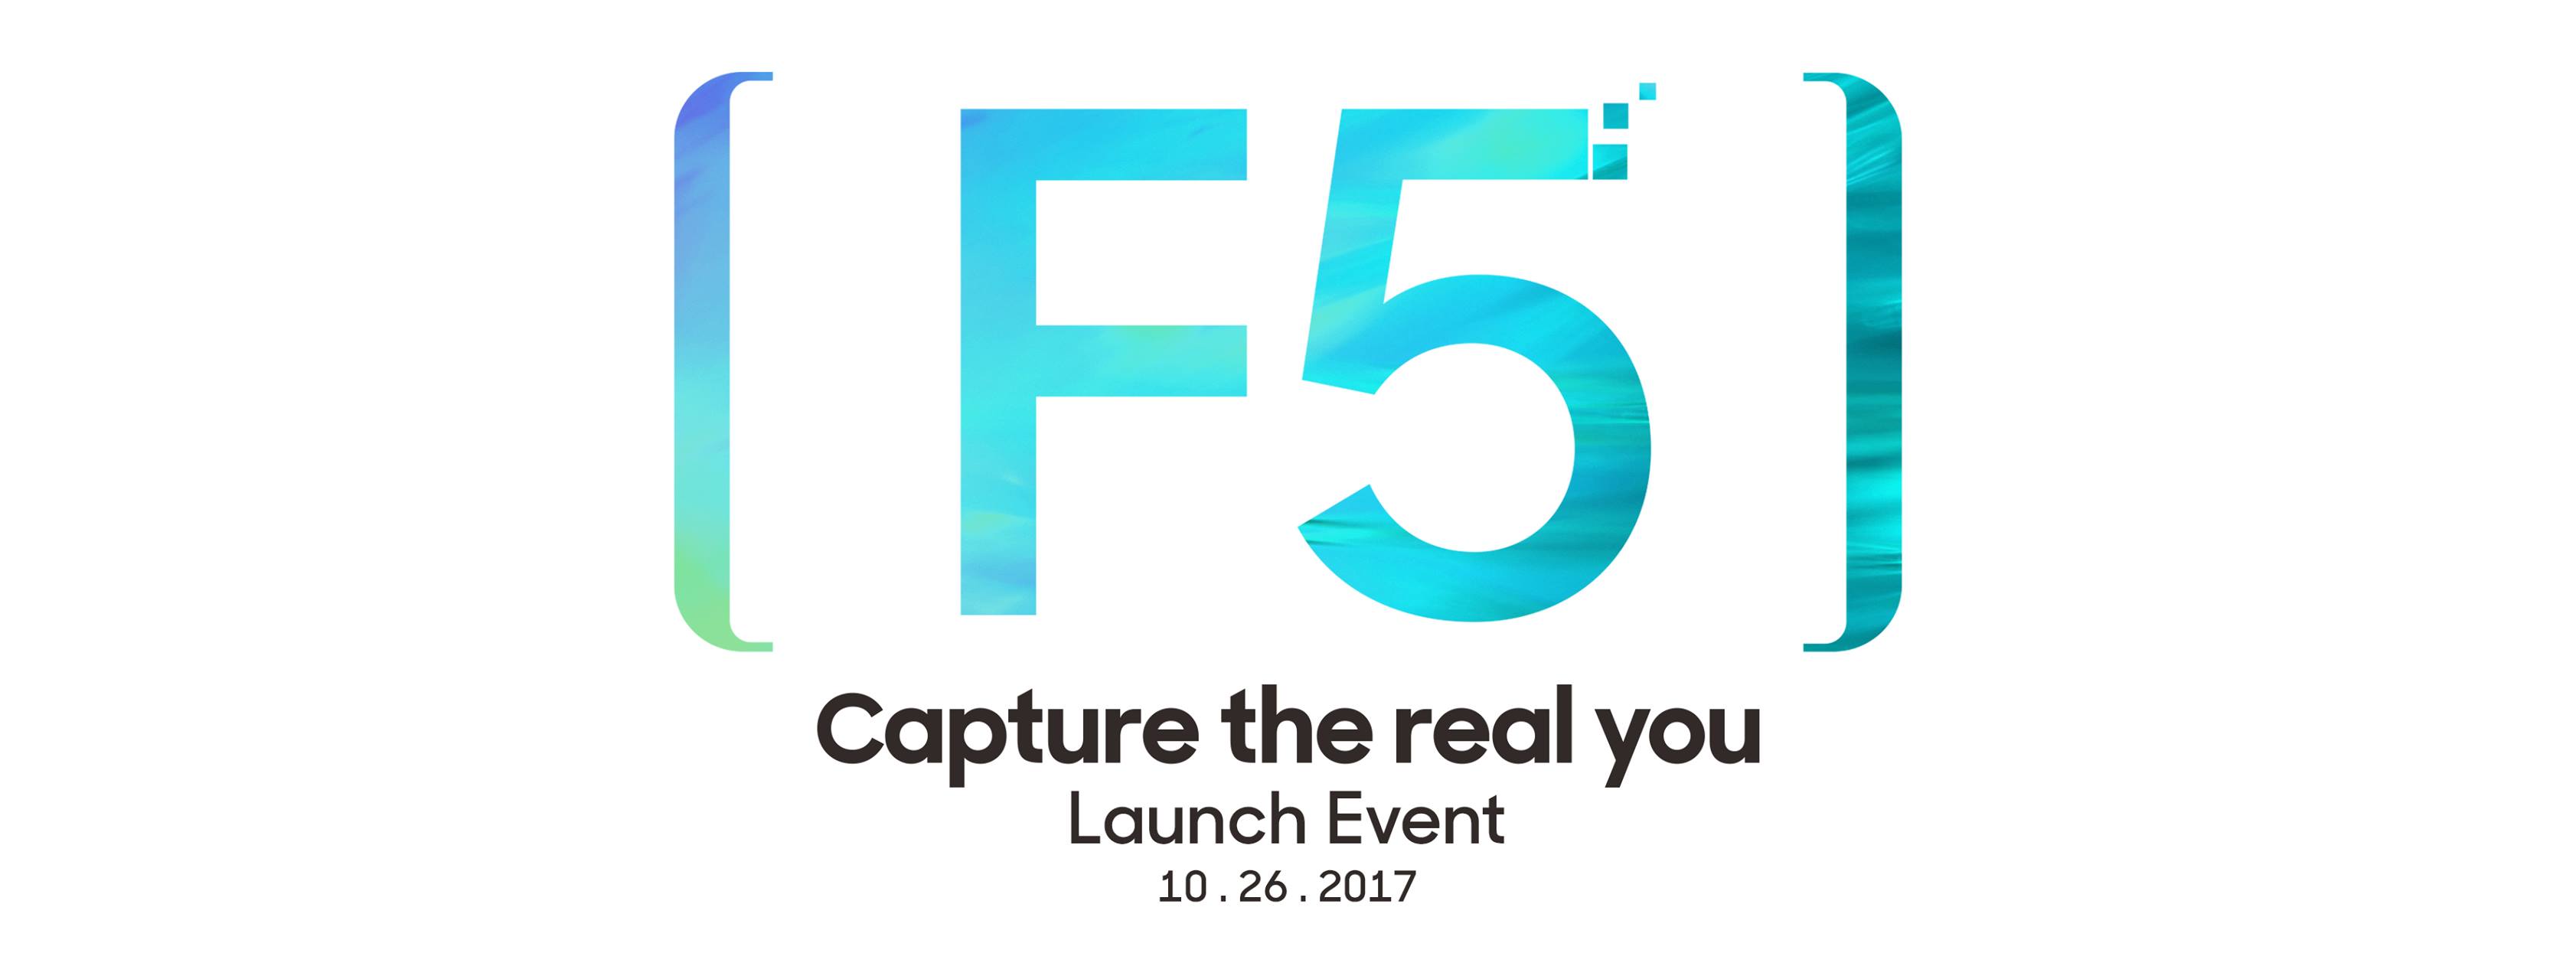 OPPO F5's debut confirmed, launching on 26 October 2017